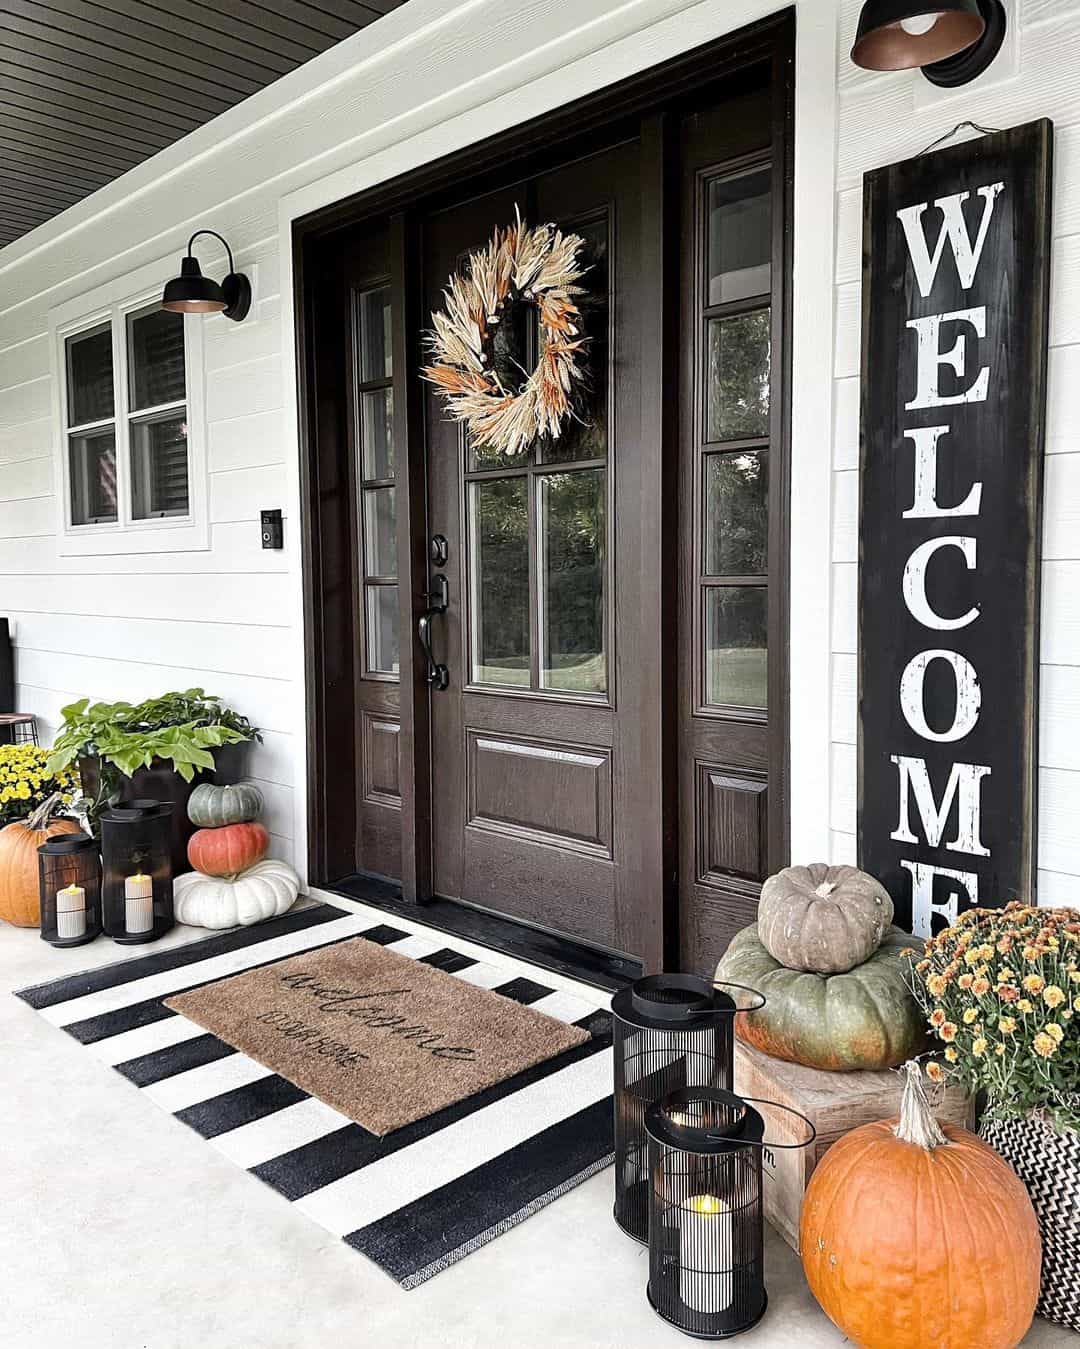 35 Fall Lantern Ideas To Welcome the Season to Your Home